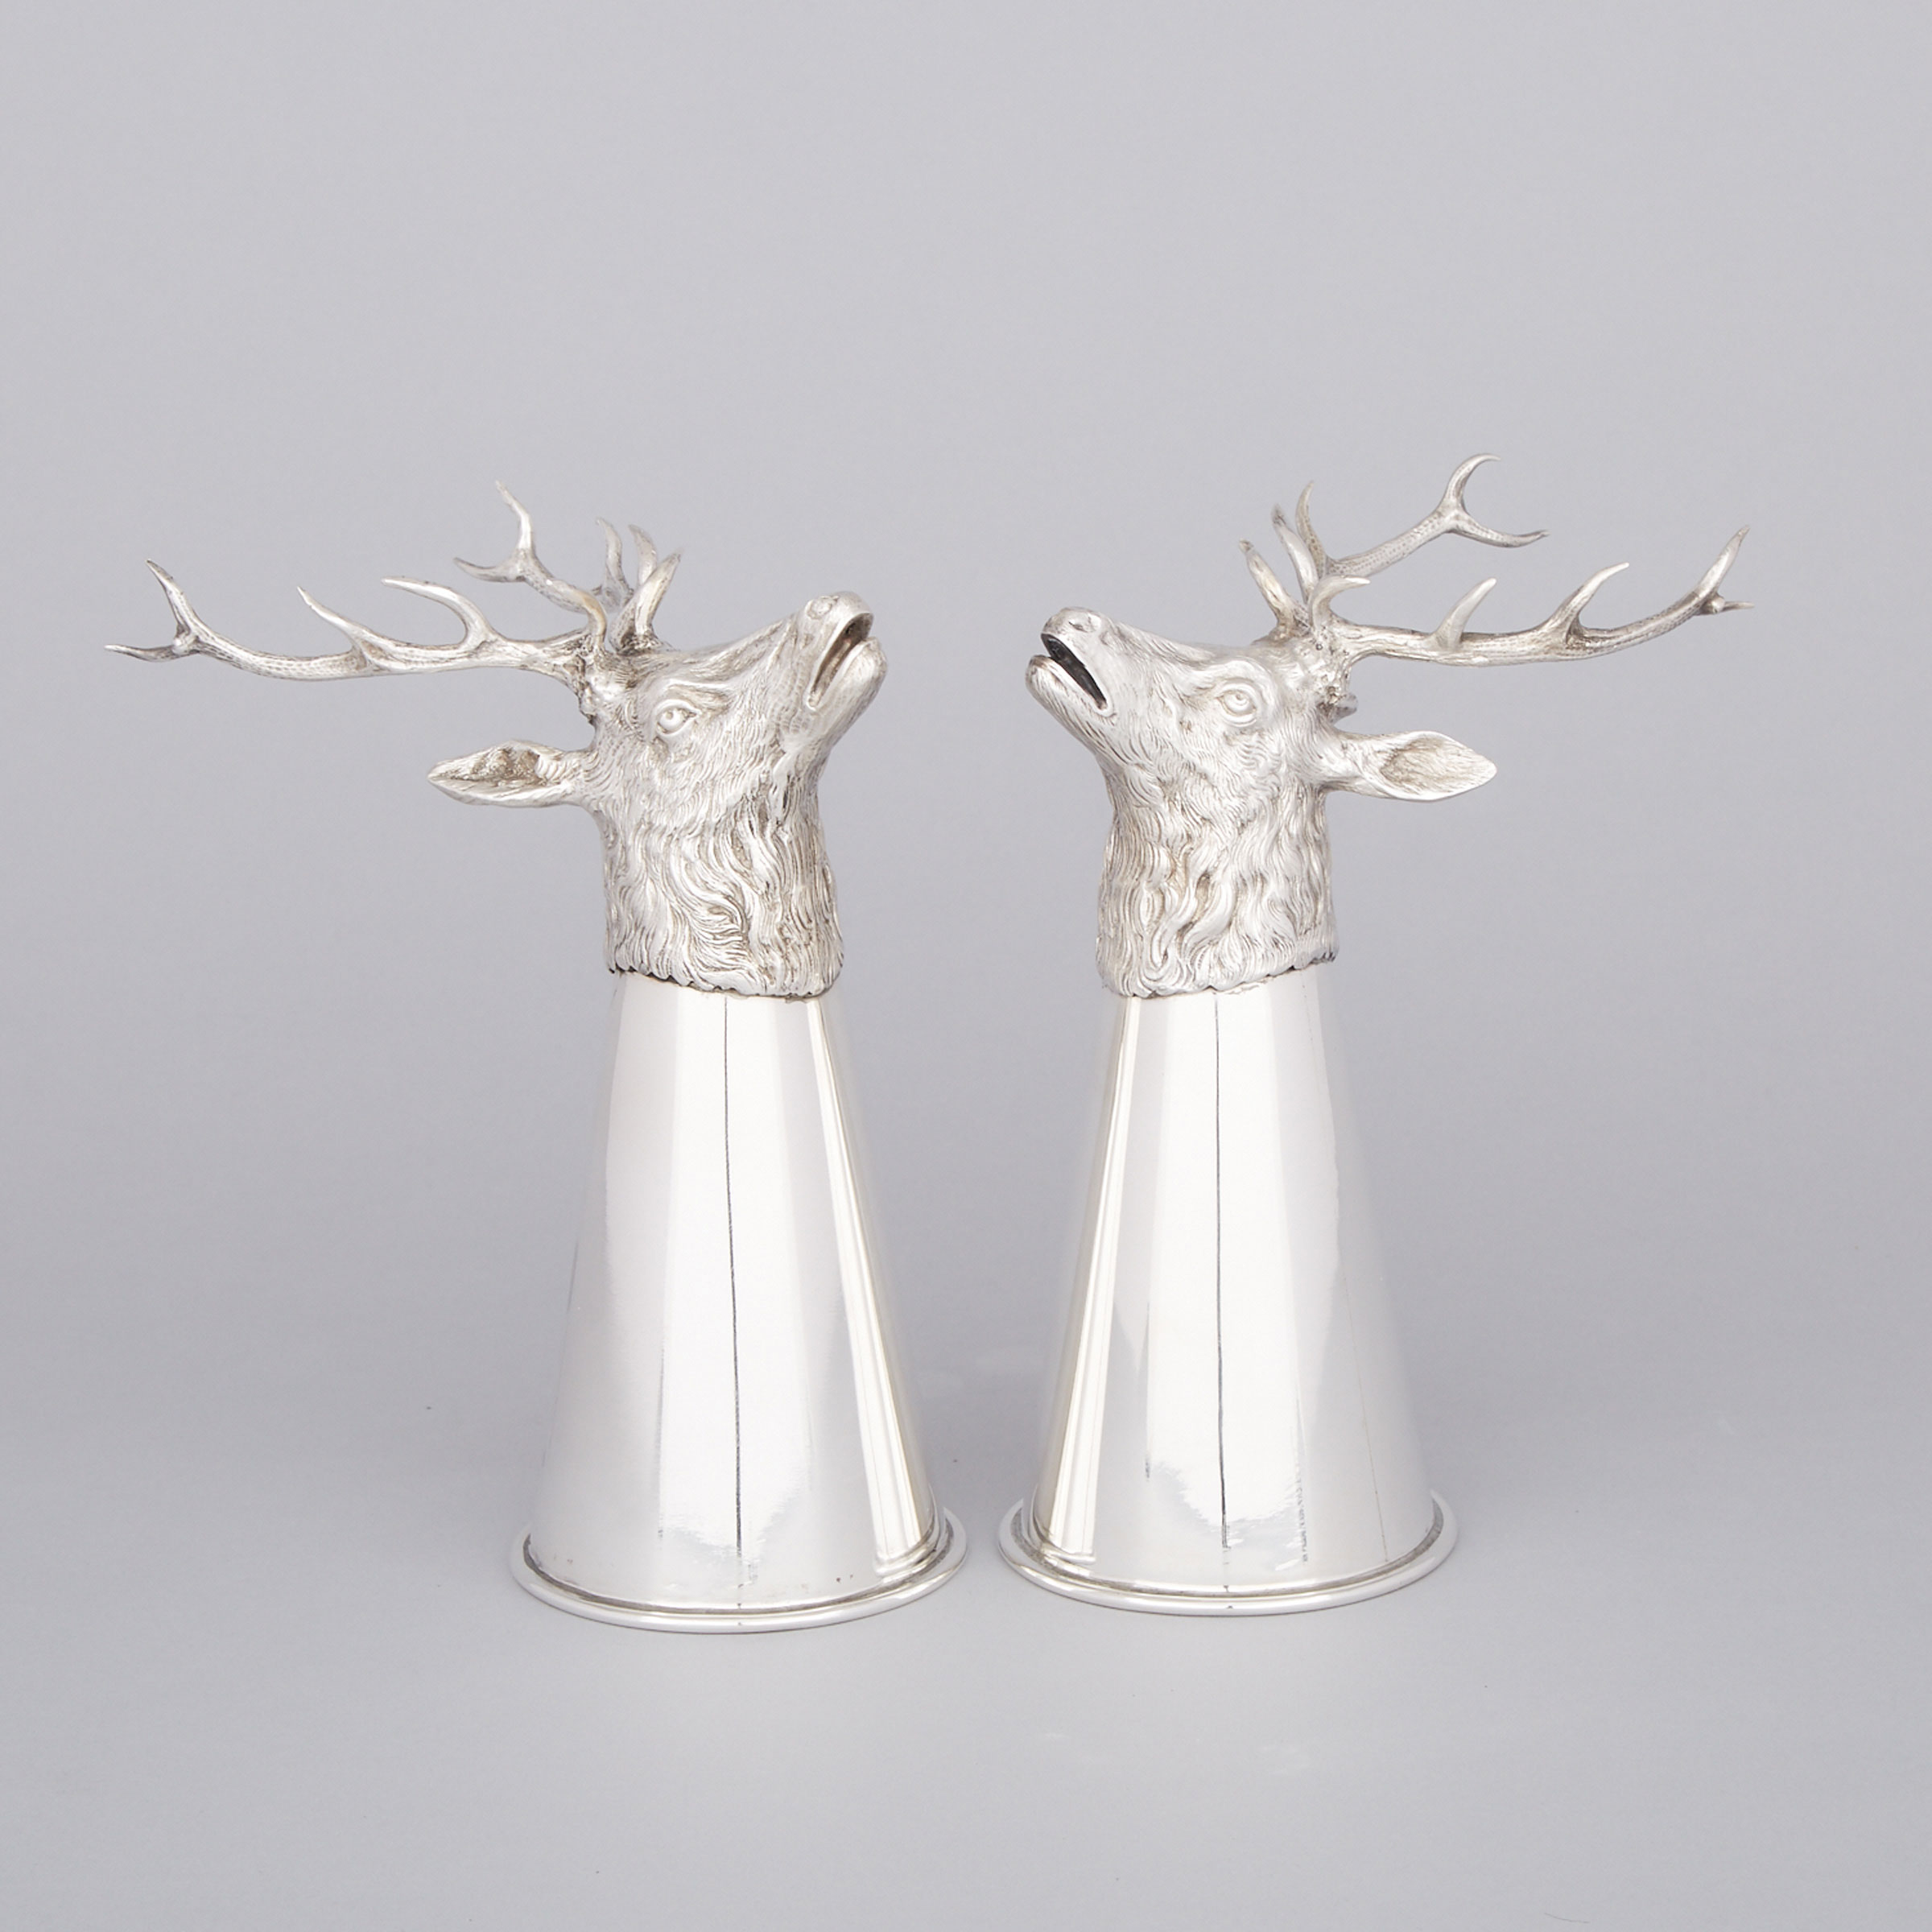 Pair of German Silver Stag’s Head Stirrup Cups, for Tiffany & Co., 20th century